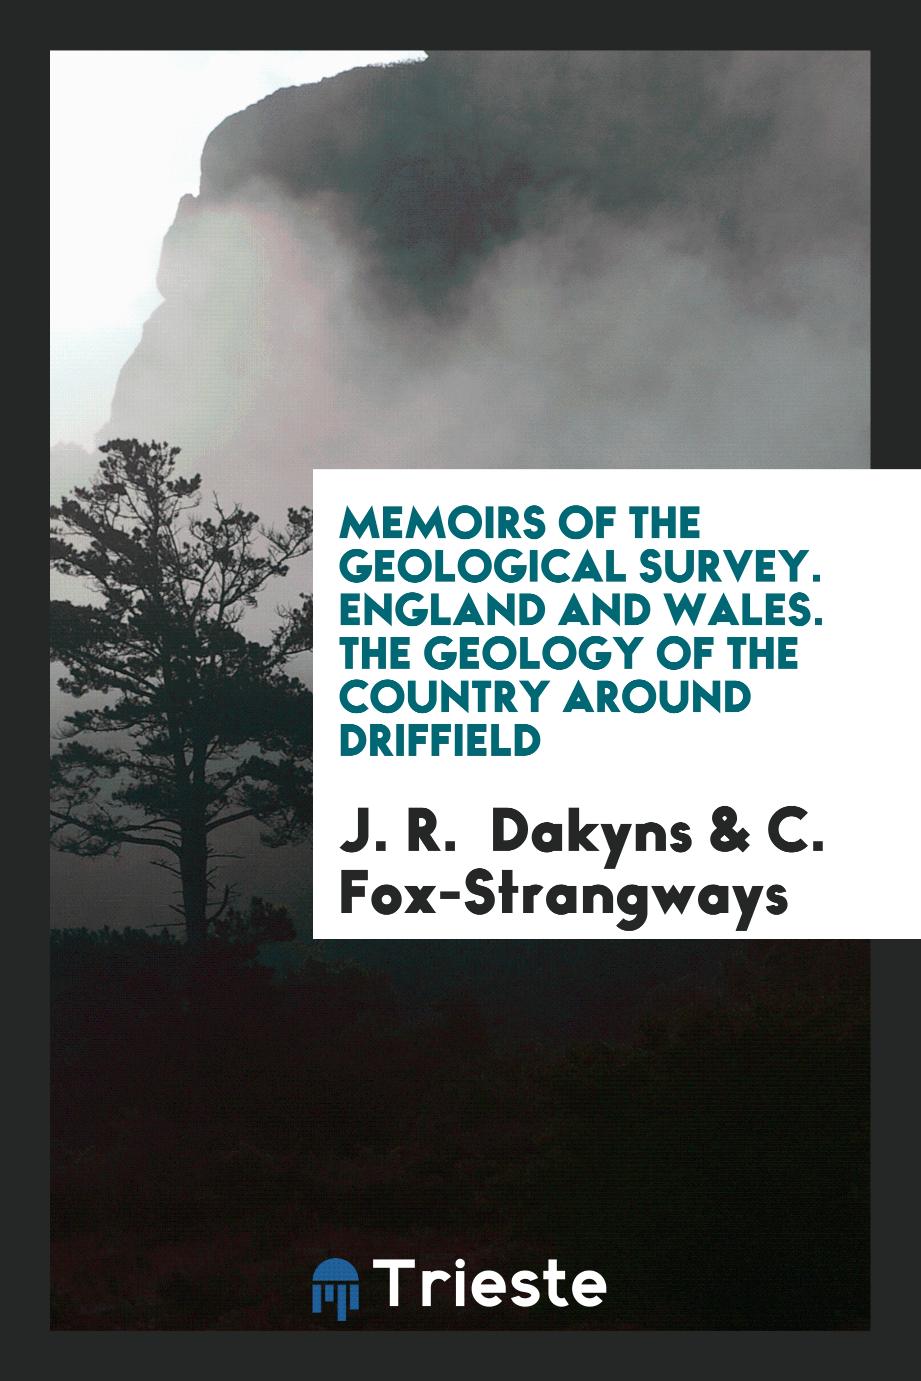 Memoirs of the Geological Survey. England and Wales. The Geology of the country around driffield